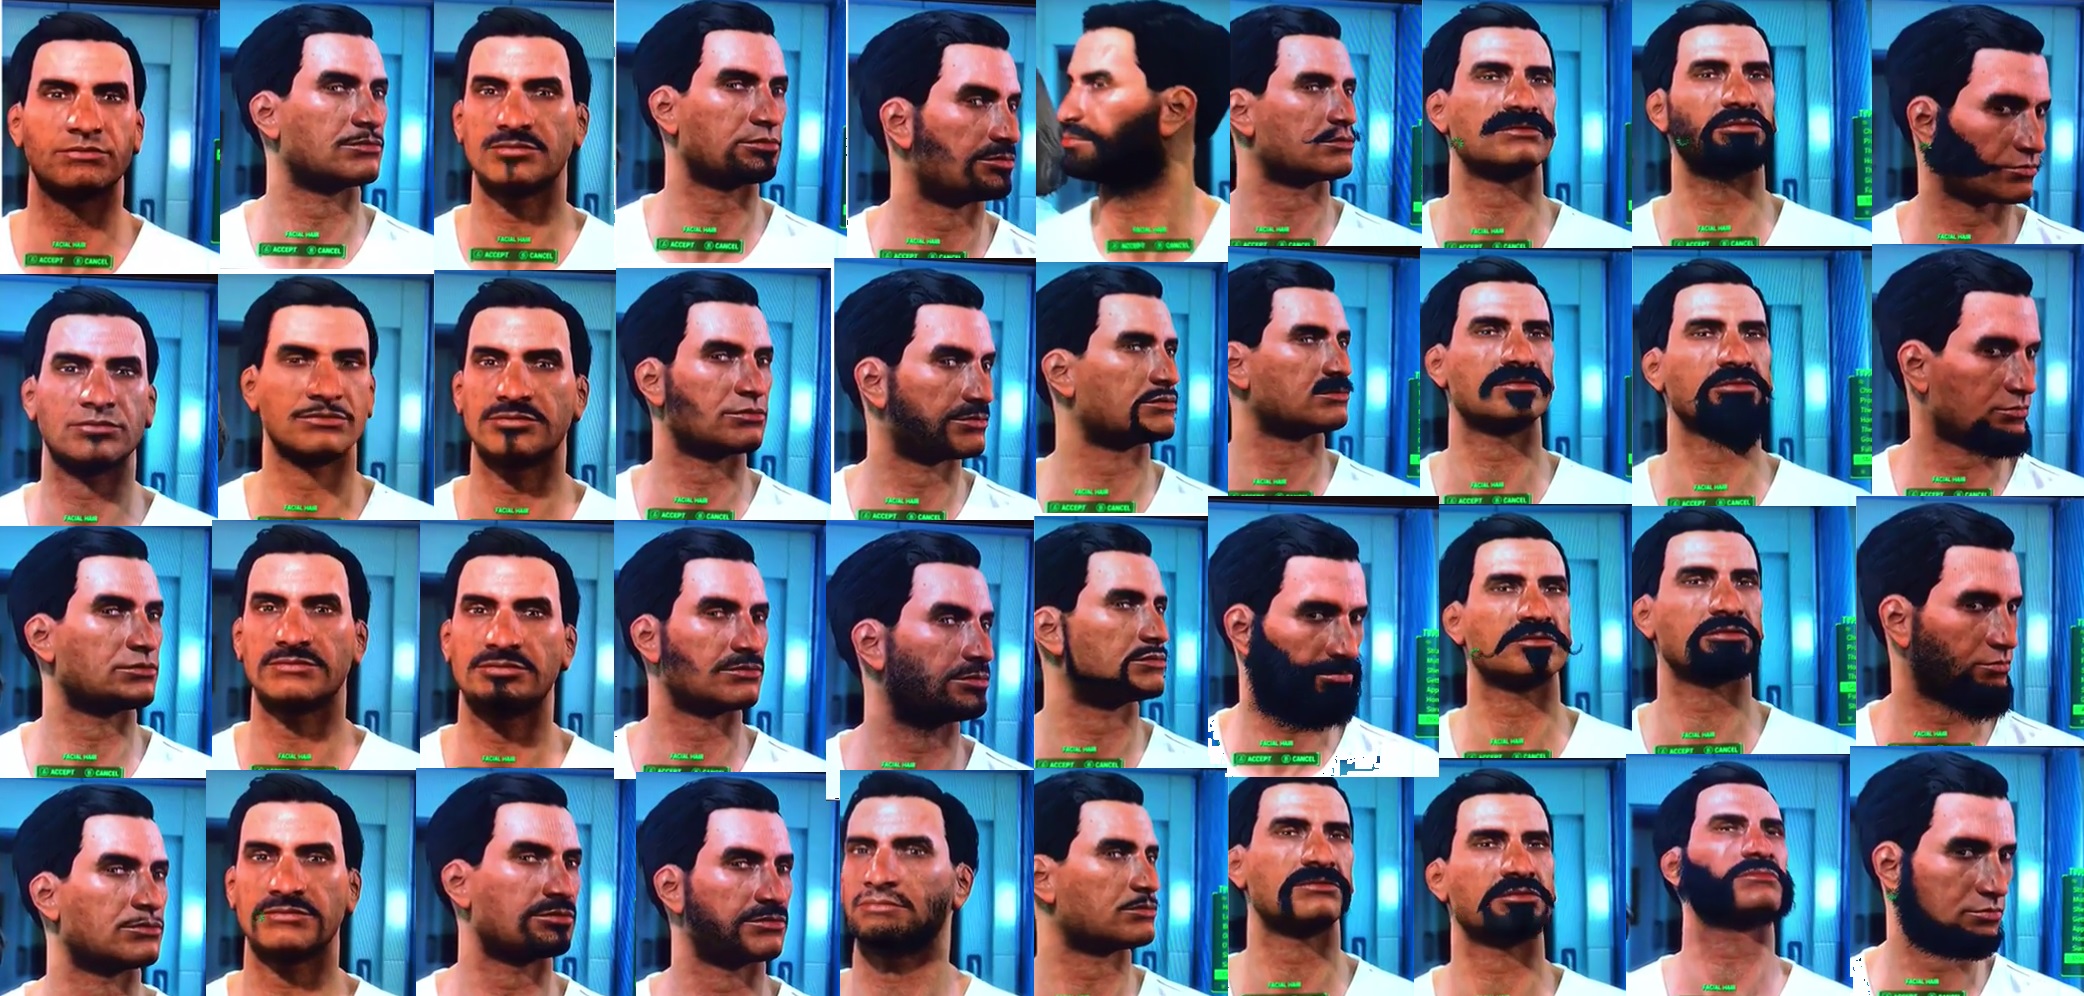 Fallout 4 more hairstyles фото 29